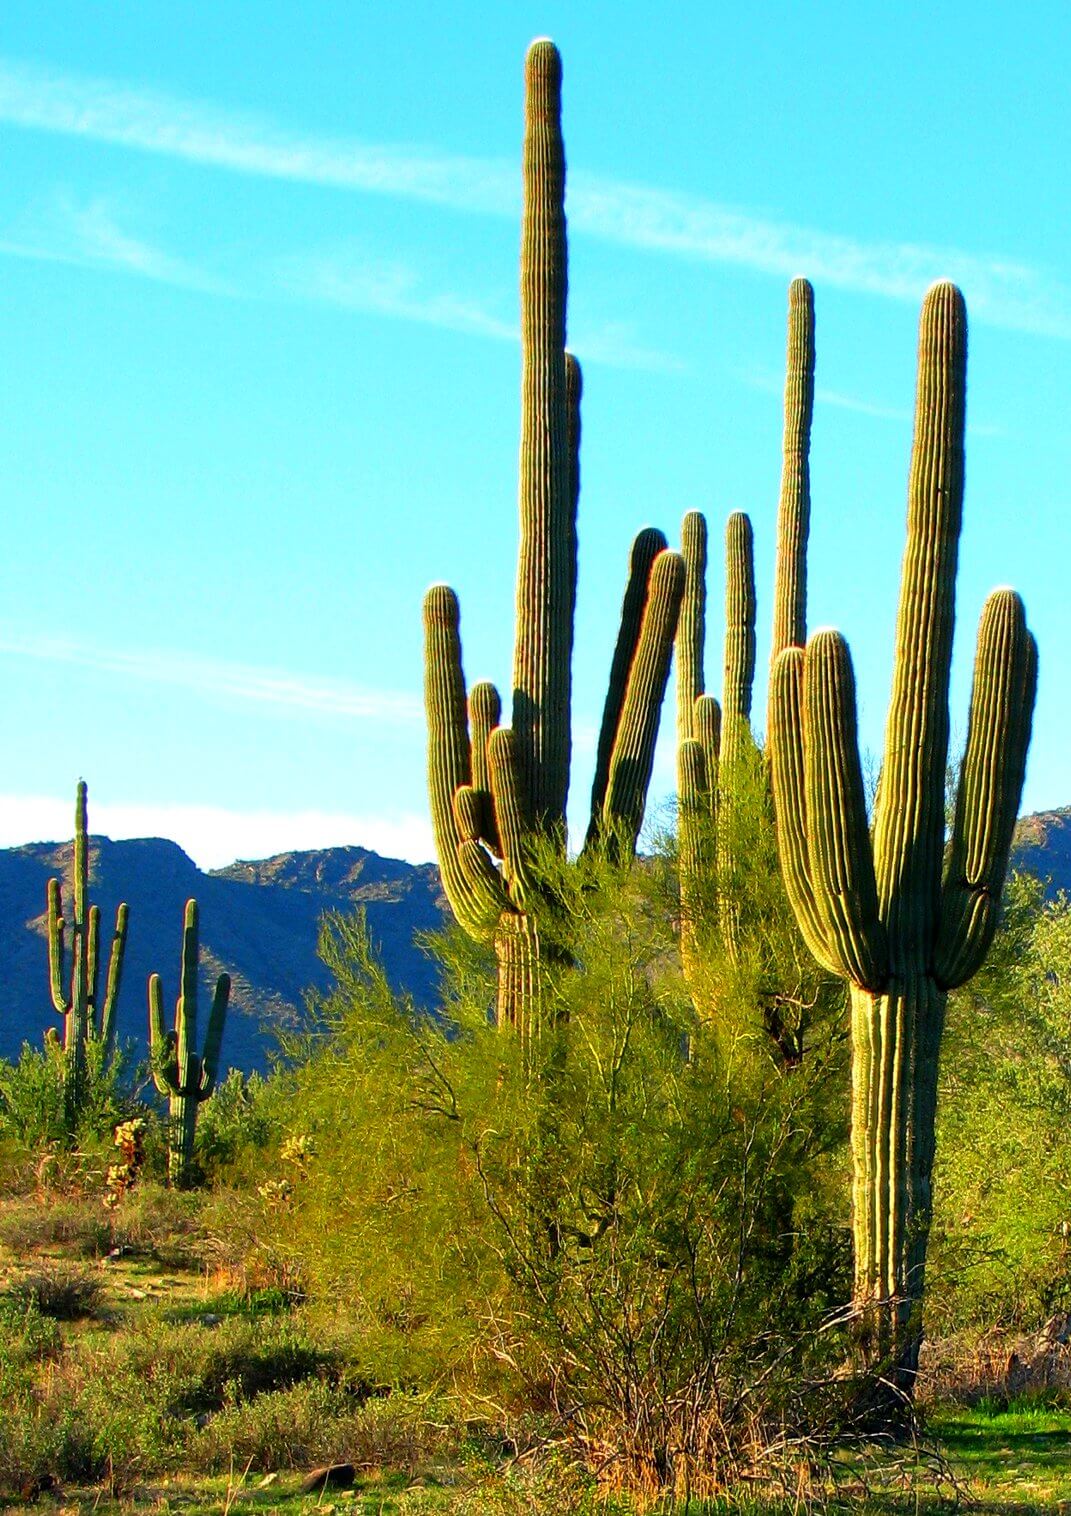 A group of Saguaro cacti with mountains in the background.